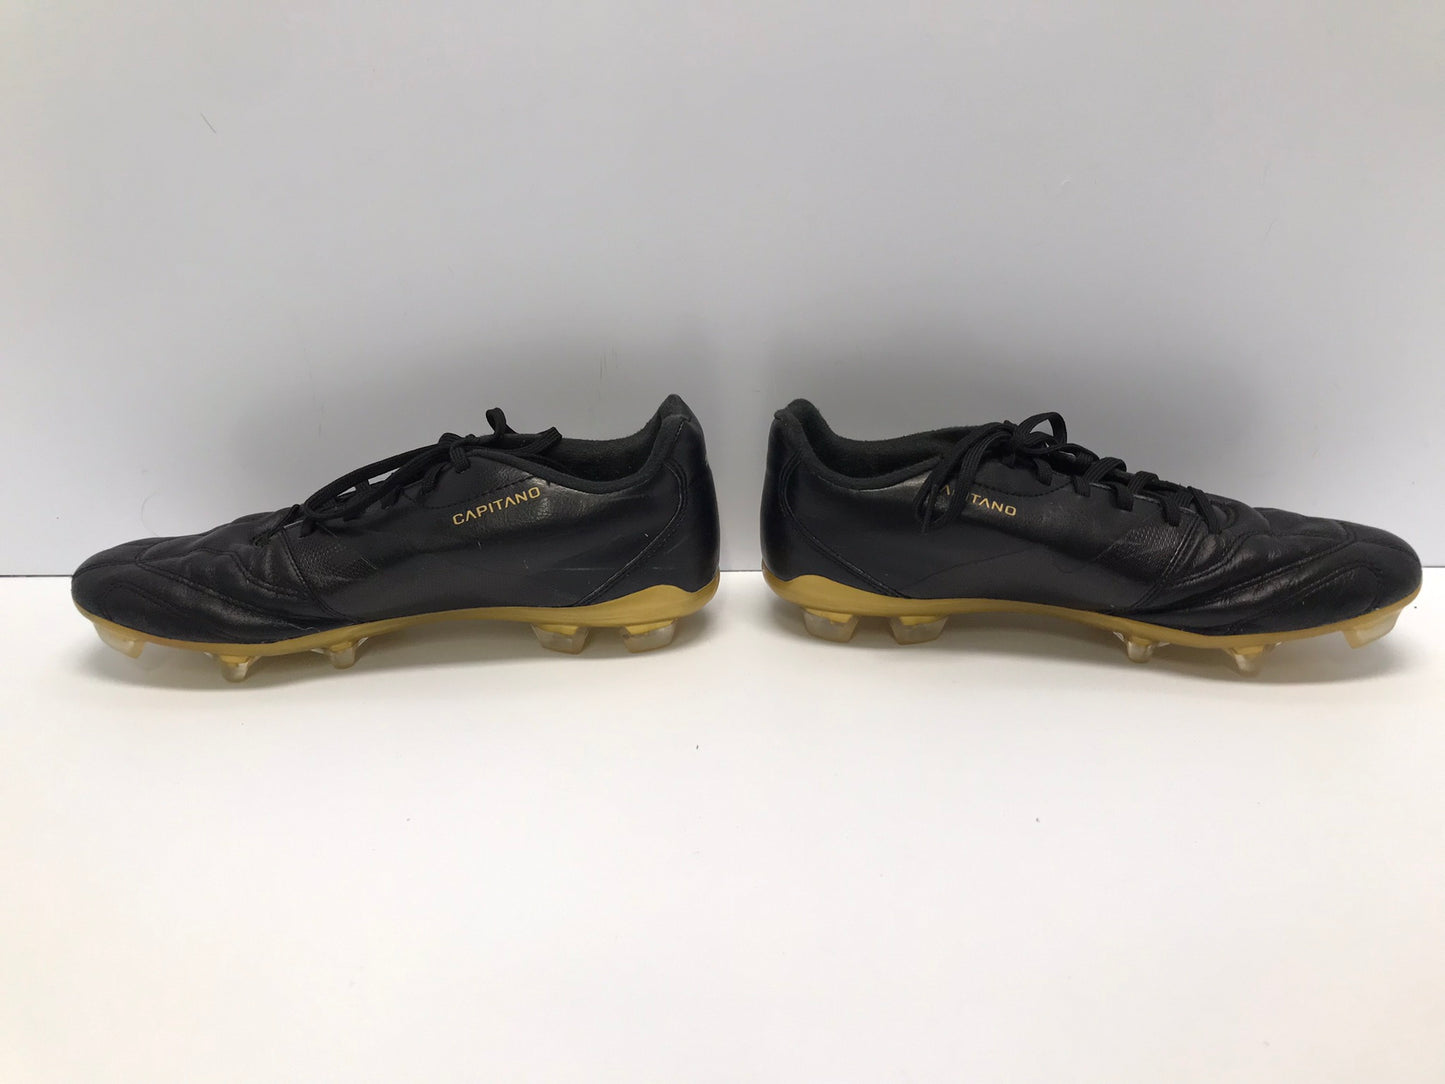 Soccer Shoes Cleats Men's Size 6 Puma Capitano Leather Black Gold New Demo Model